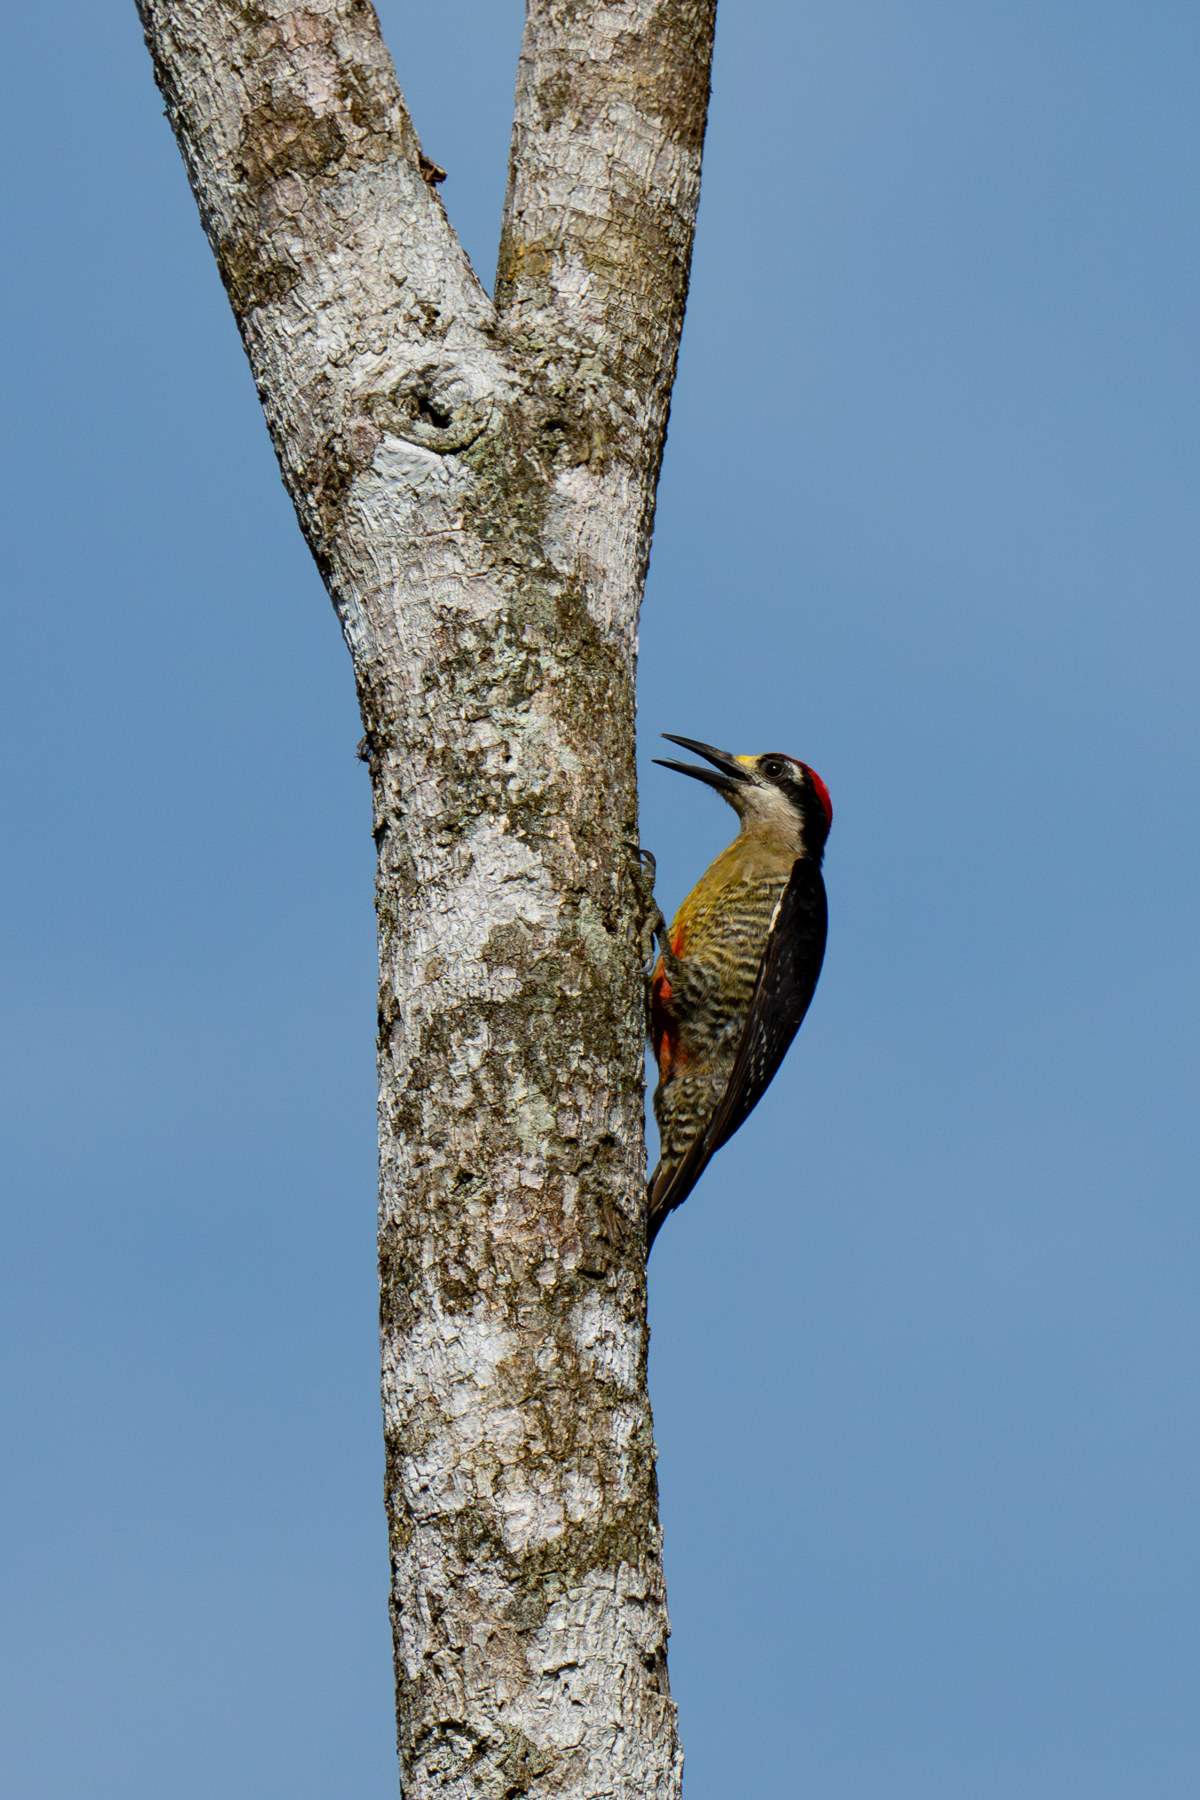 Black-cheeked Woodpecker at a tree (image by Inger Vandyke)